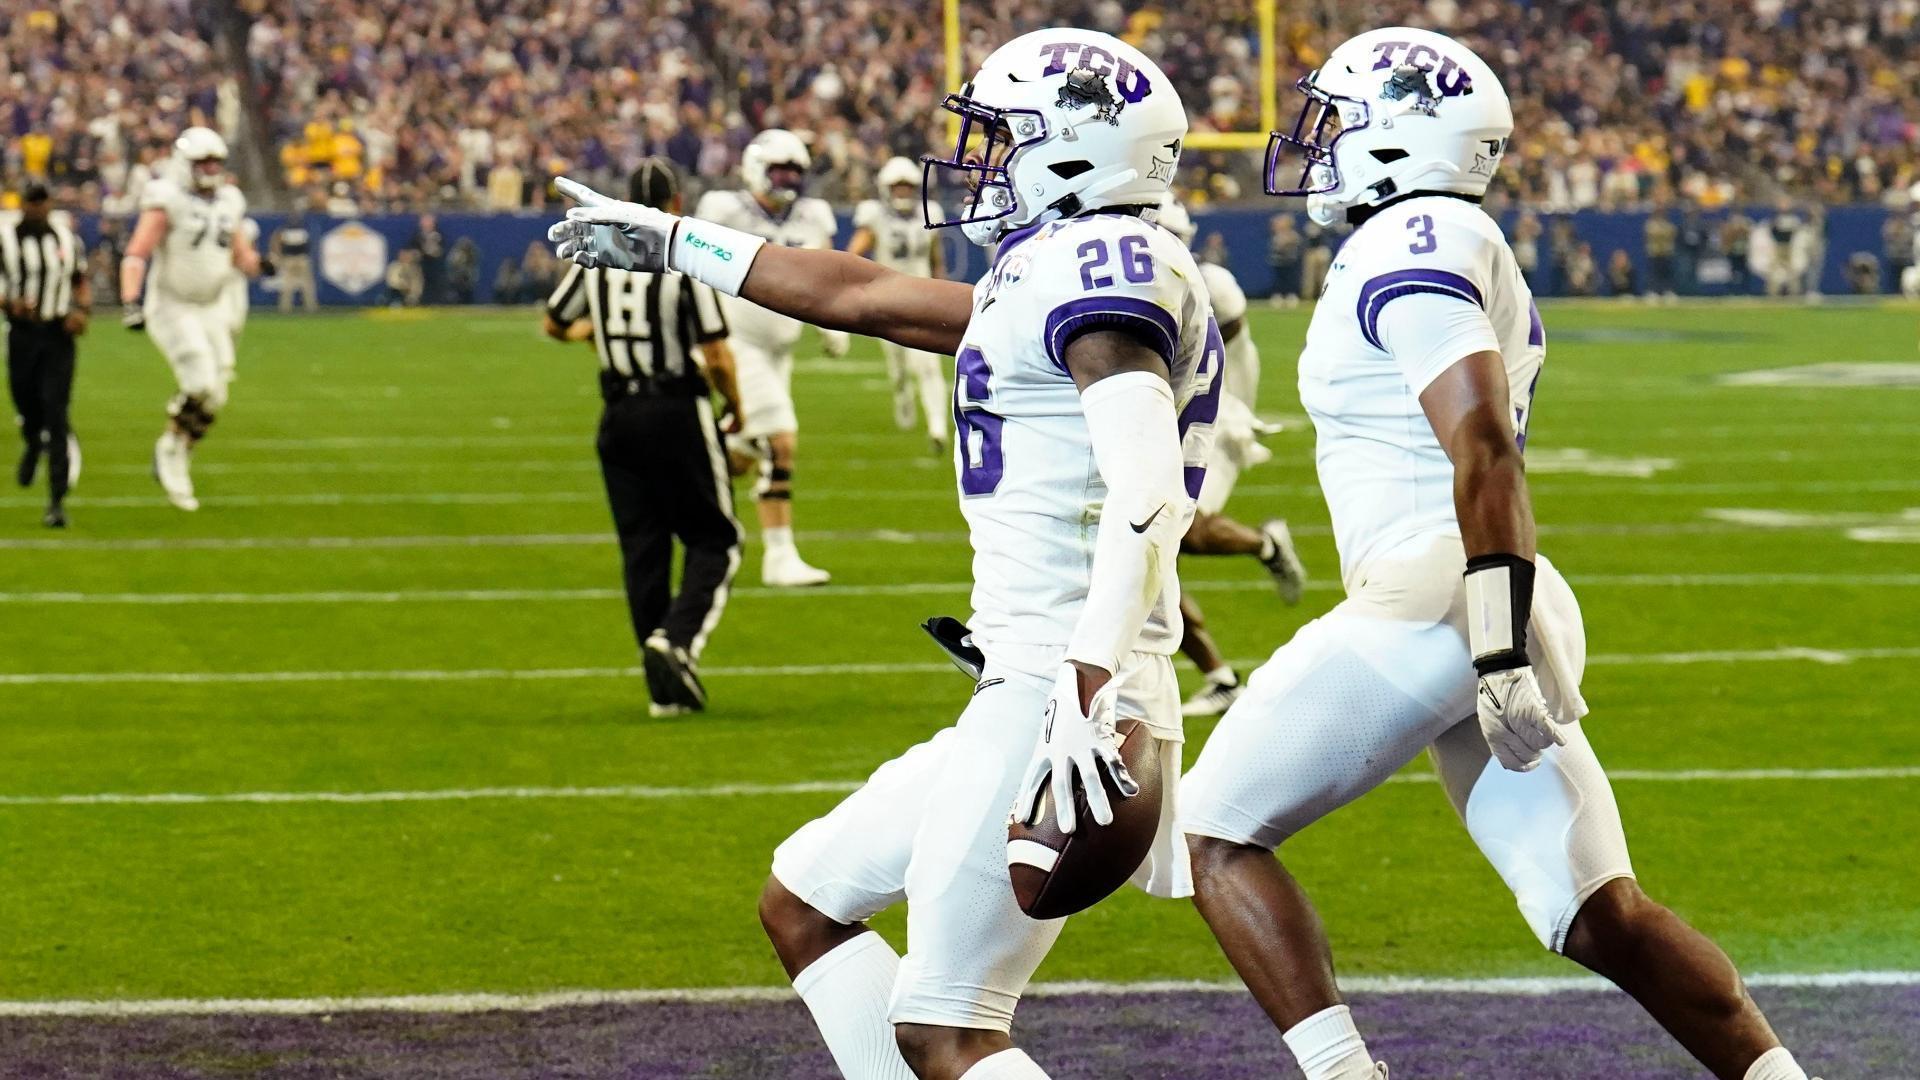 TCU is the first to score after a pick-six - Stream the Video - Watch ESPN